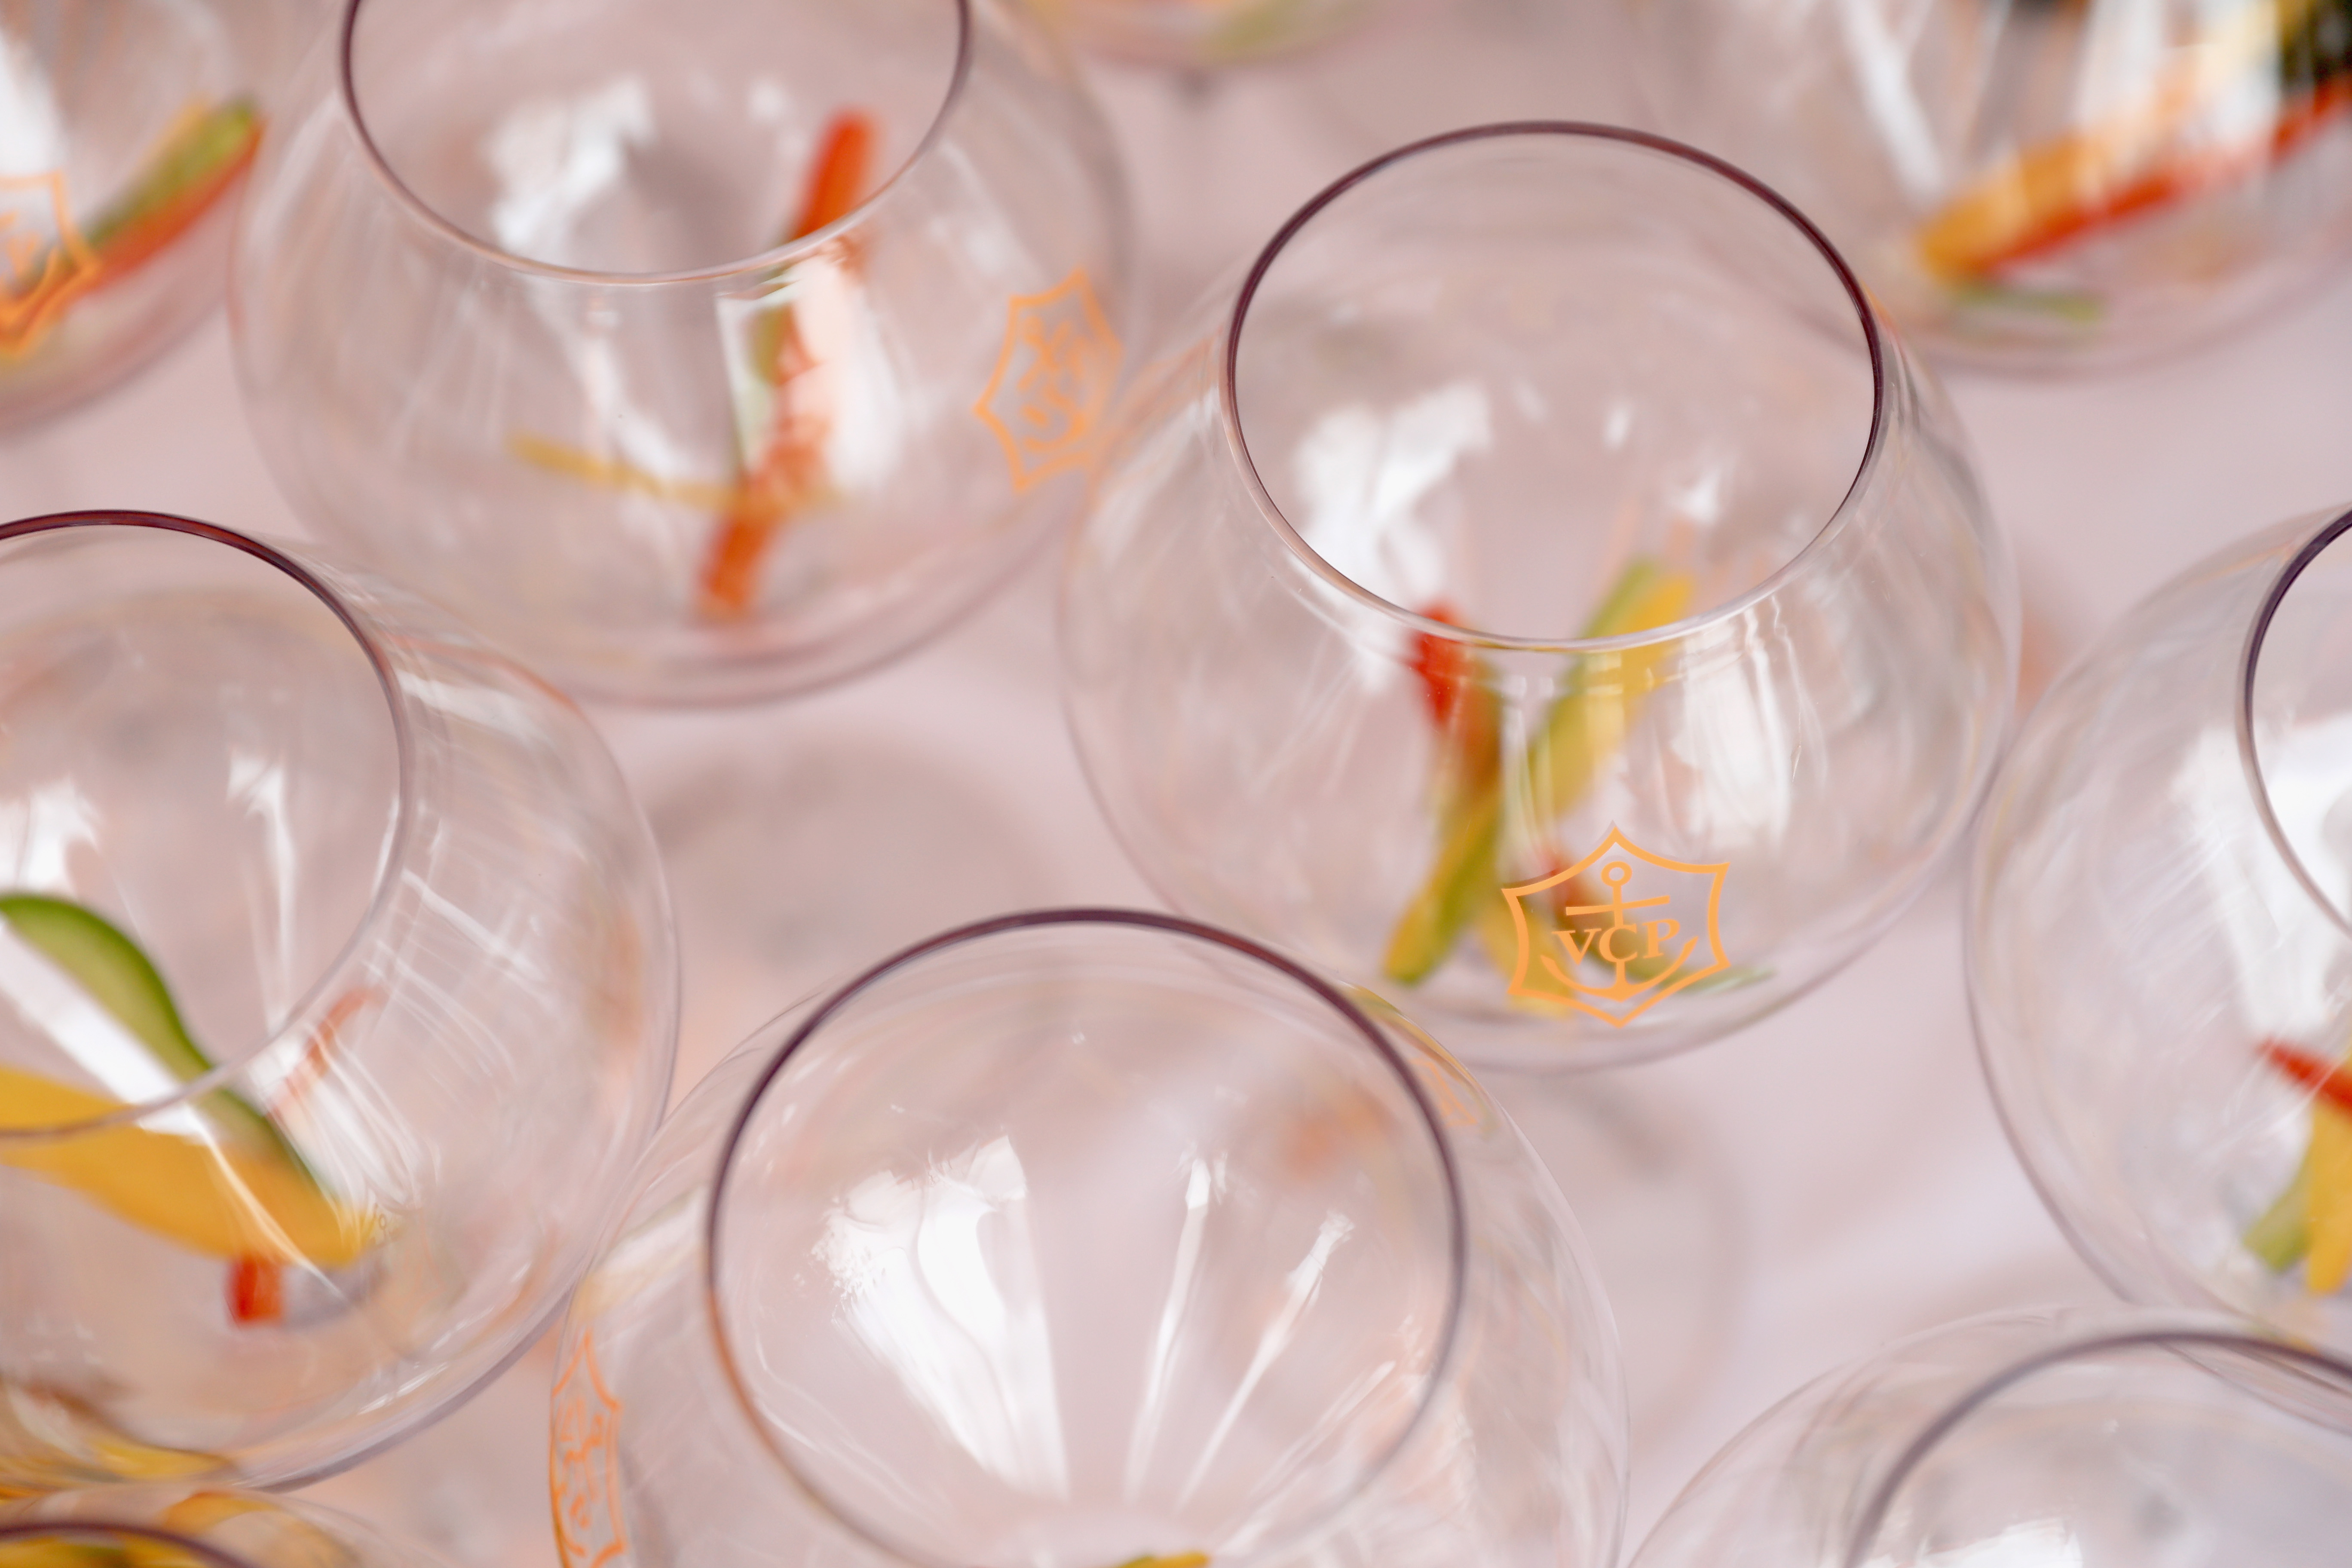 JERSEY CITY, NJ - JUNE 04:  Cocktail glasses on display during the Ninth Annual Veuve Clicquot Polo Classic at Liberty State Park on June 4, 2016 in Jersey City, New Jersey.  (Photo by Neilson Barnard/Getty Images for Veuve Clicquot)